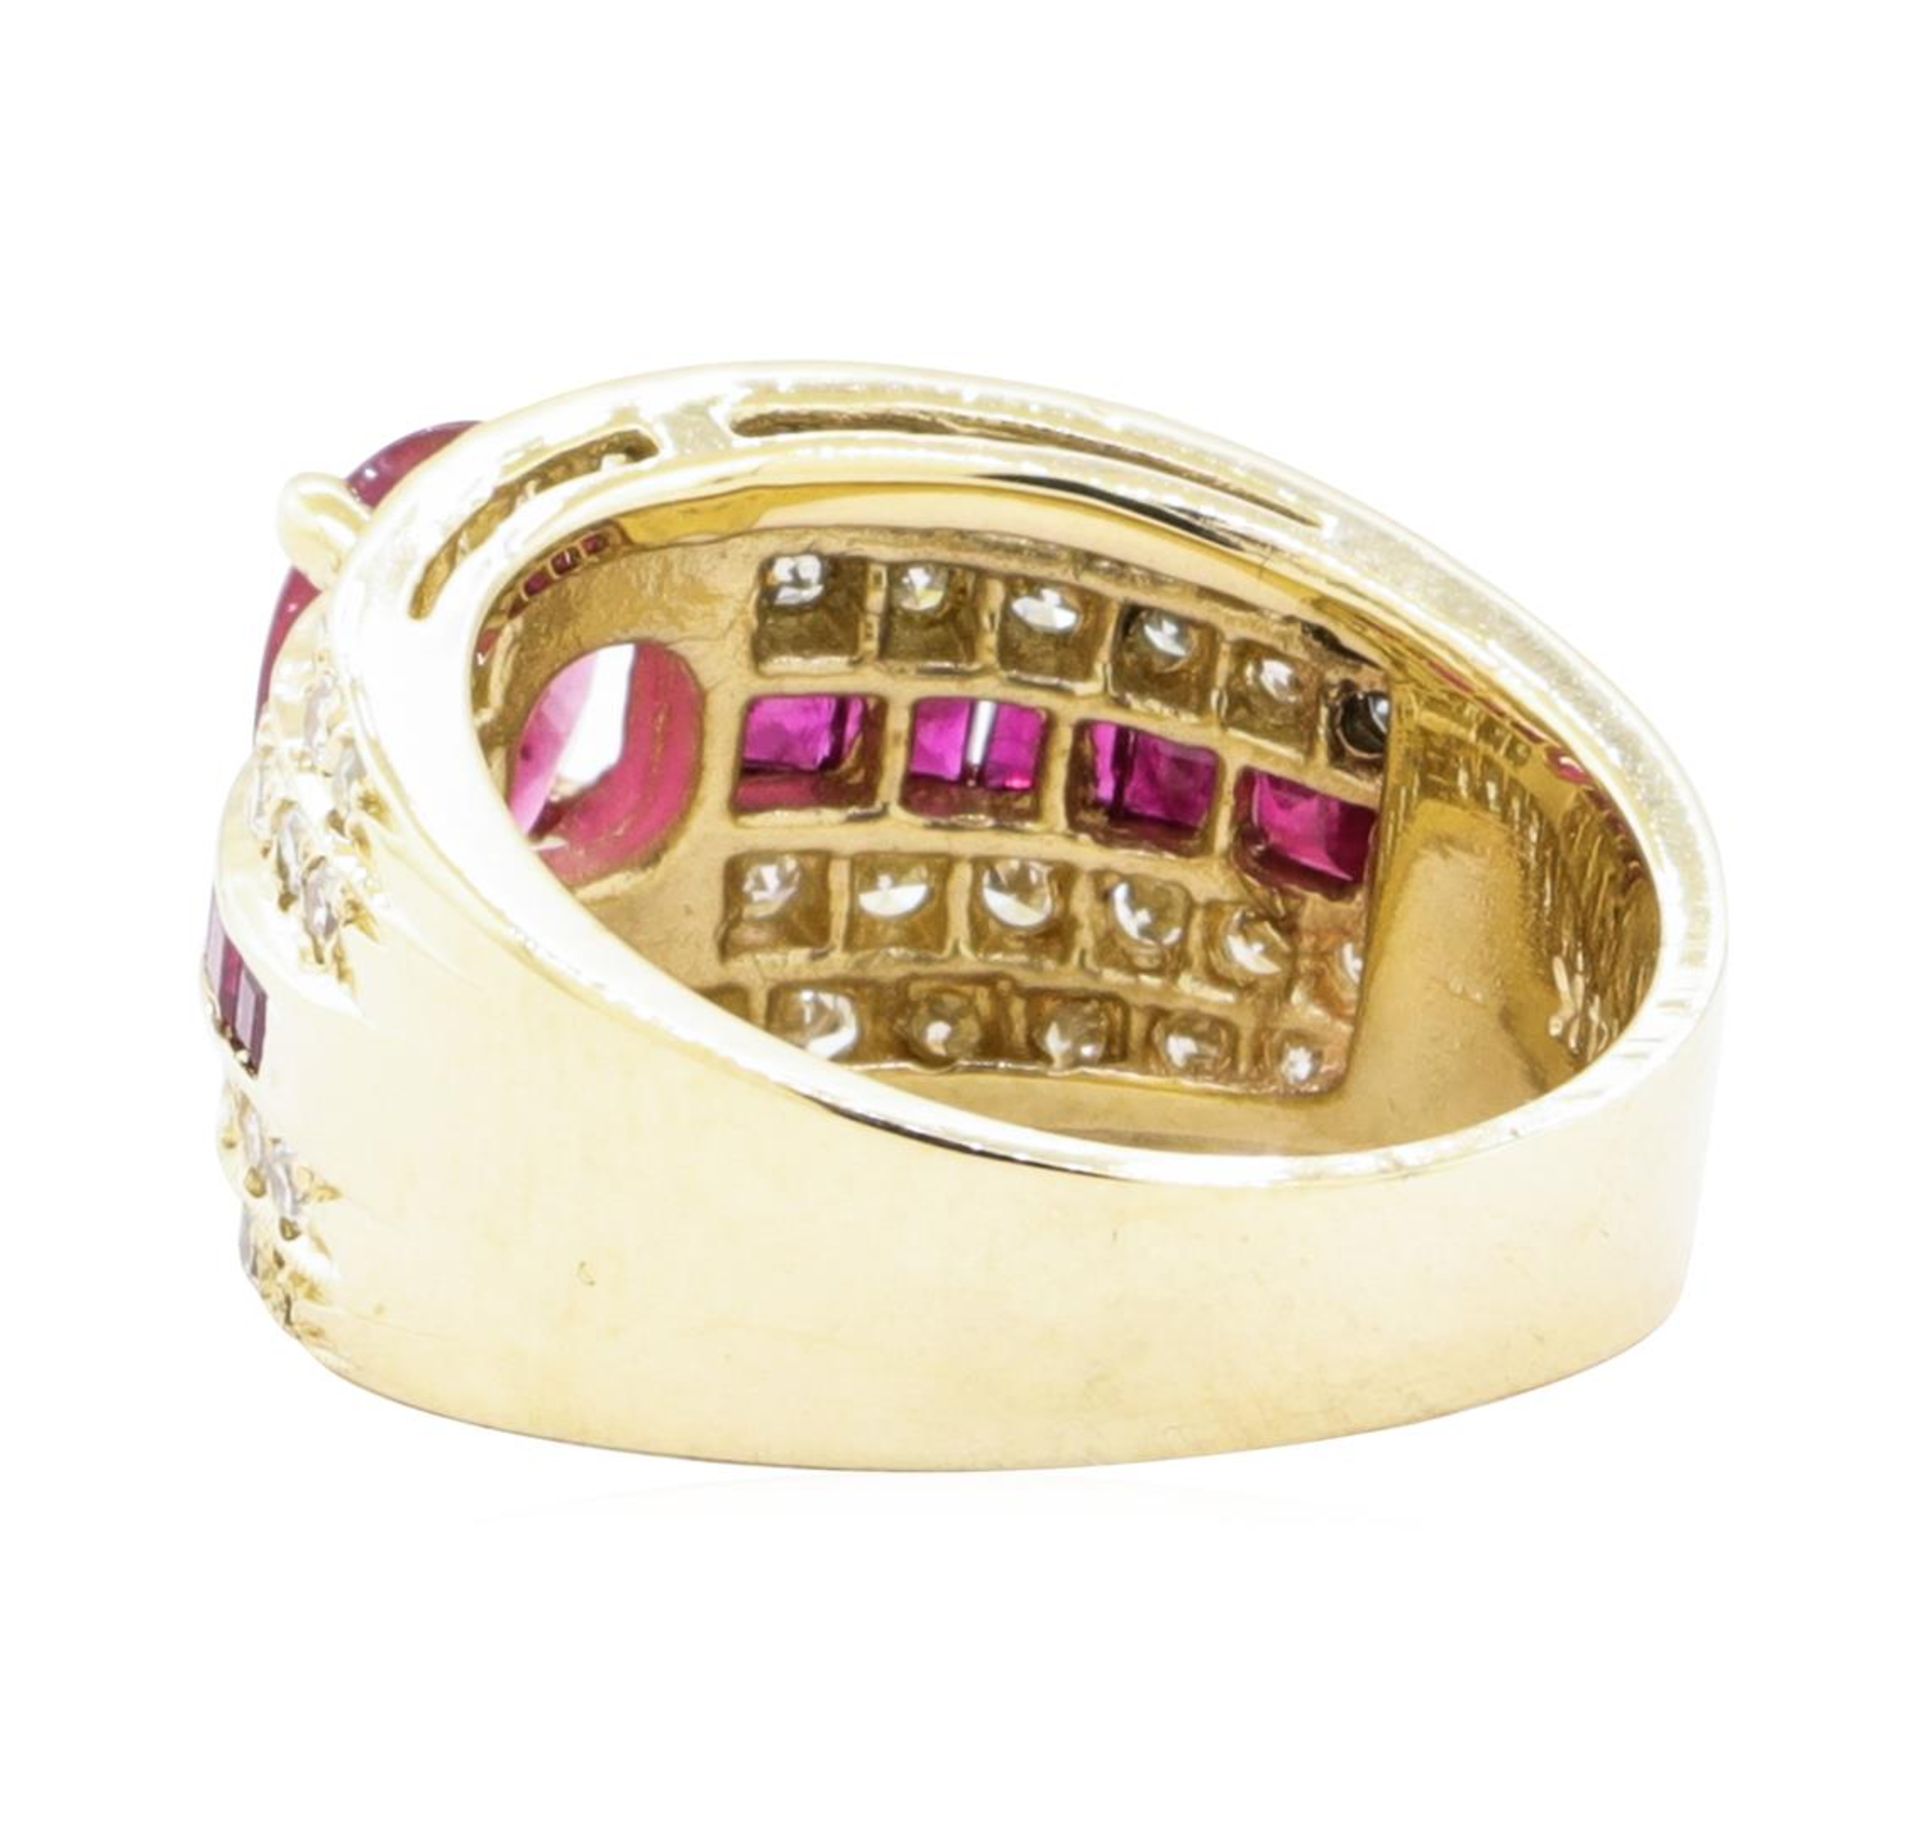 2.50 ctw Ruby and Diamond Ring - 14KT Yellow Gold - Image 3 of 5